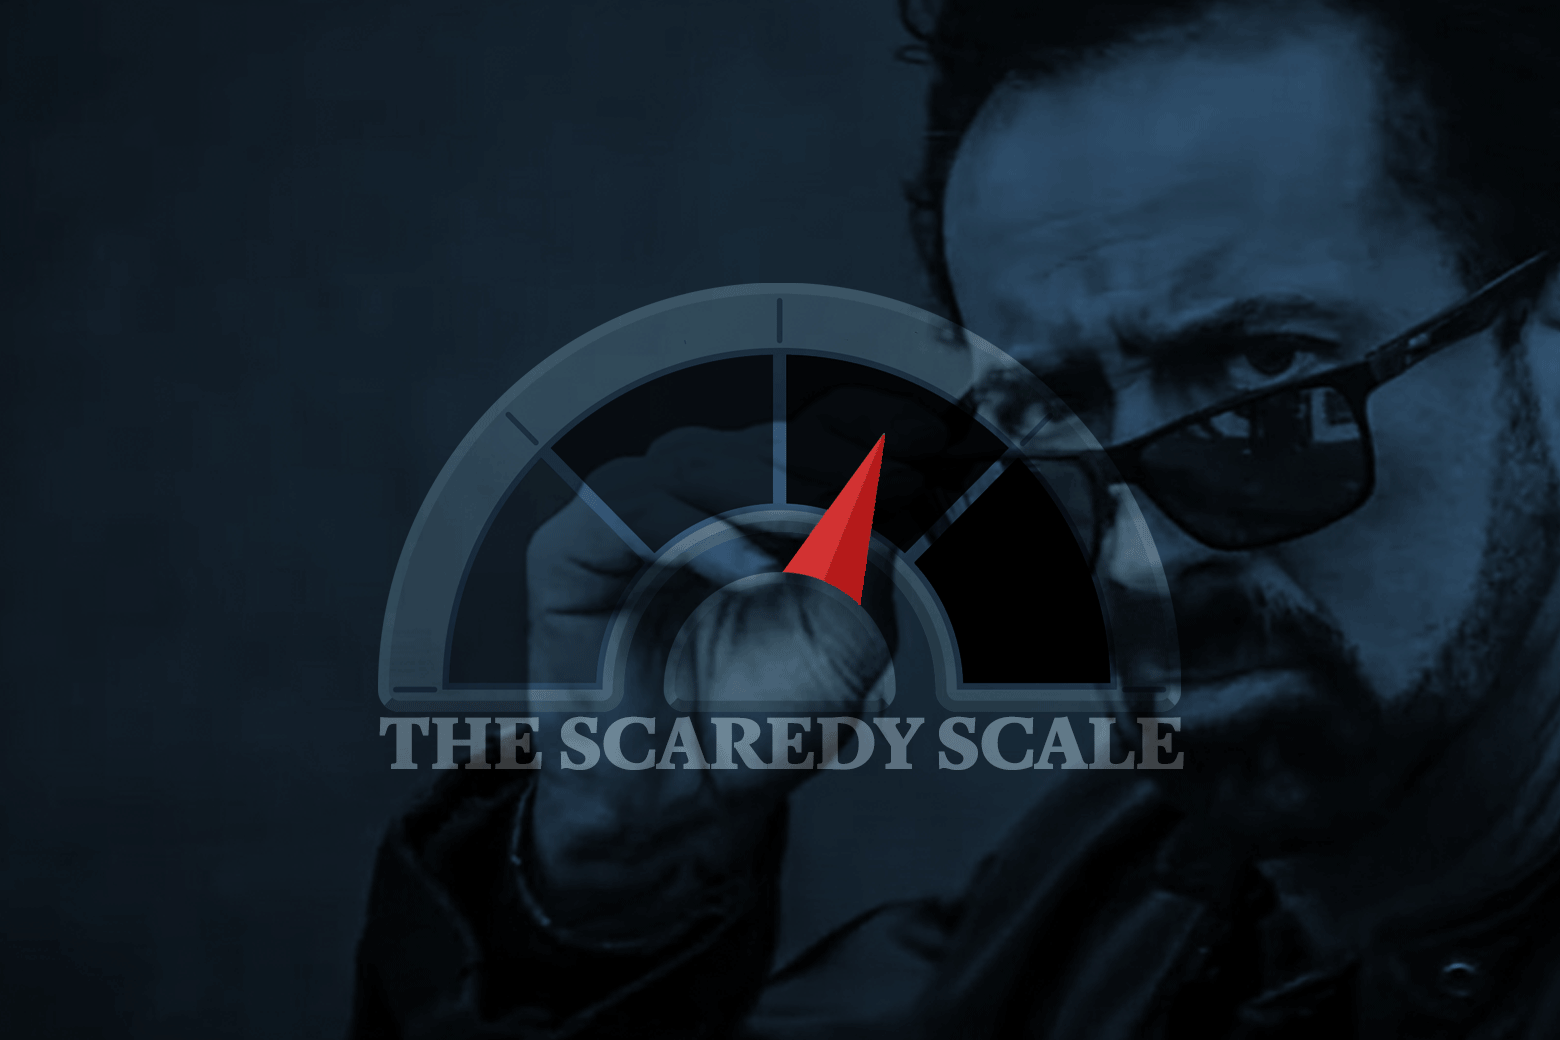 Nicolas Cage lowers his sunglasses and looks at the camera. In front of him, a meter twitches. It's labeled "The Scaredy Scale."